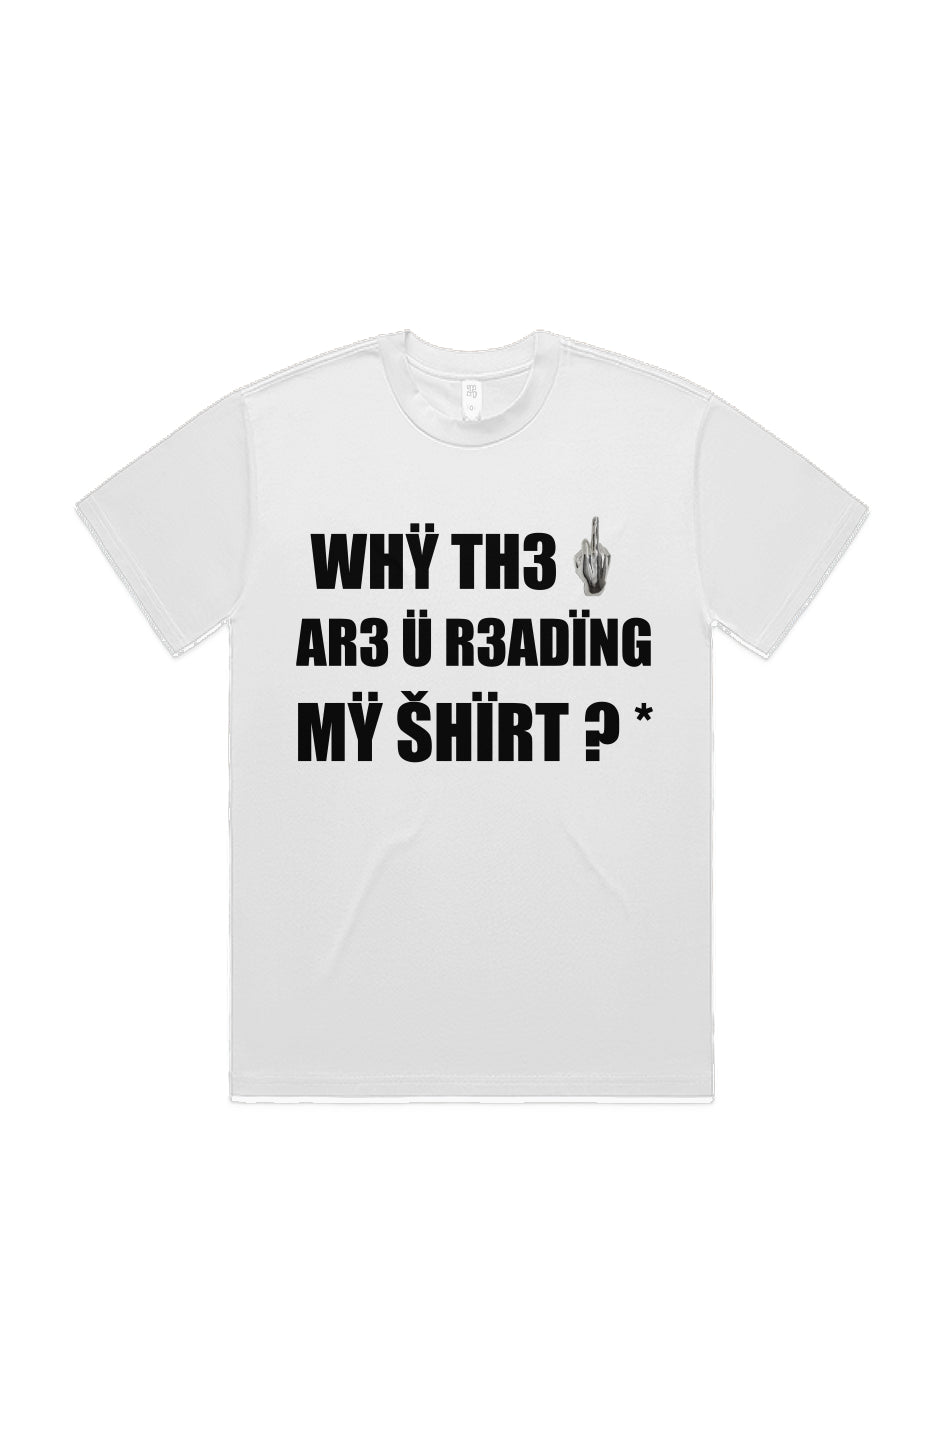 Why You Reading (T-Shirt) White